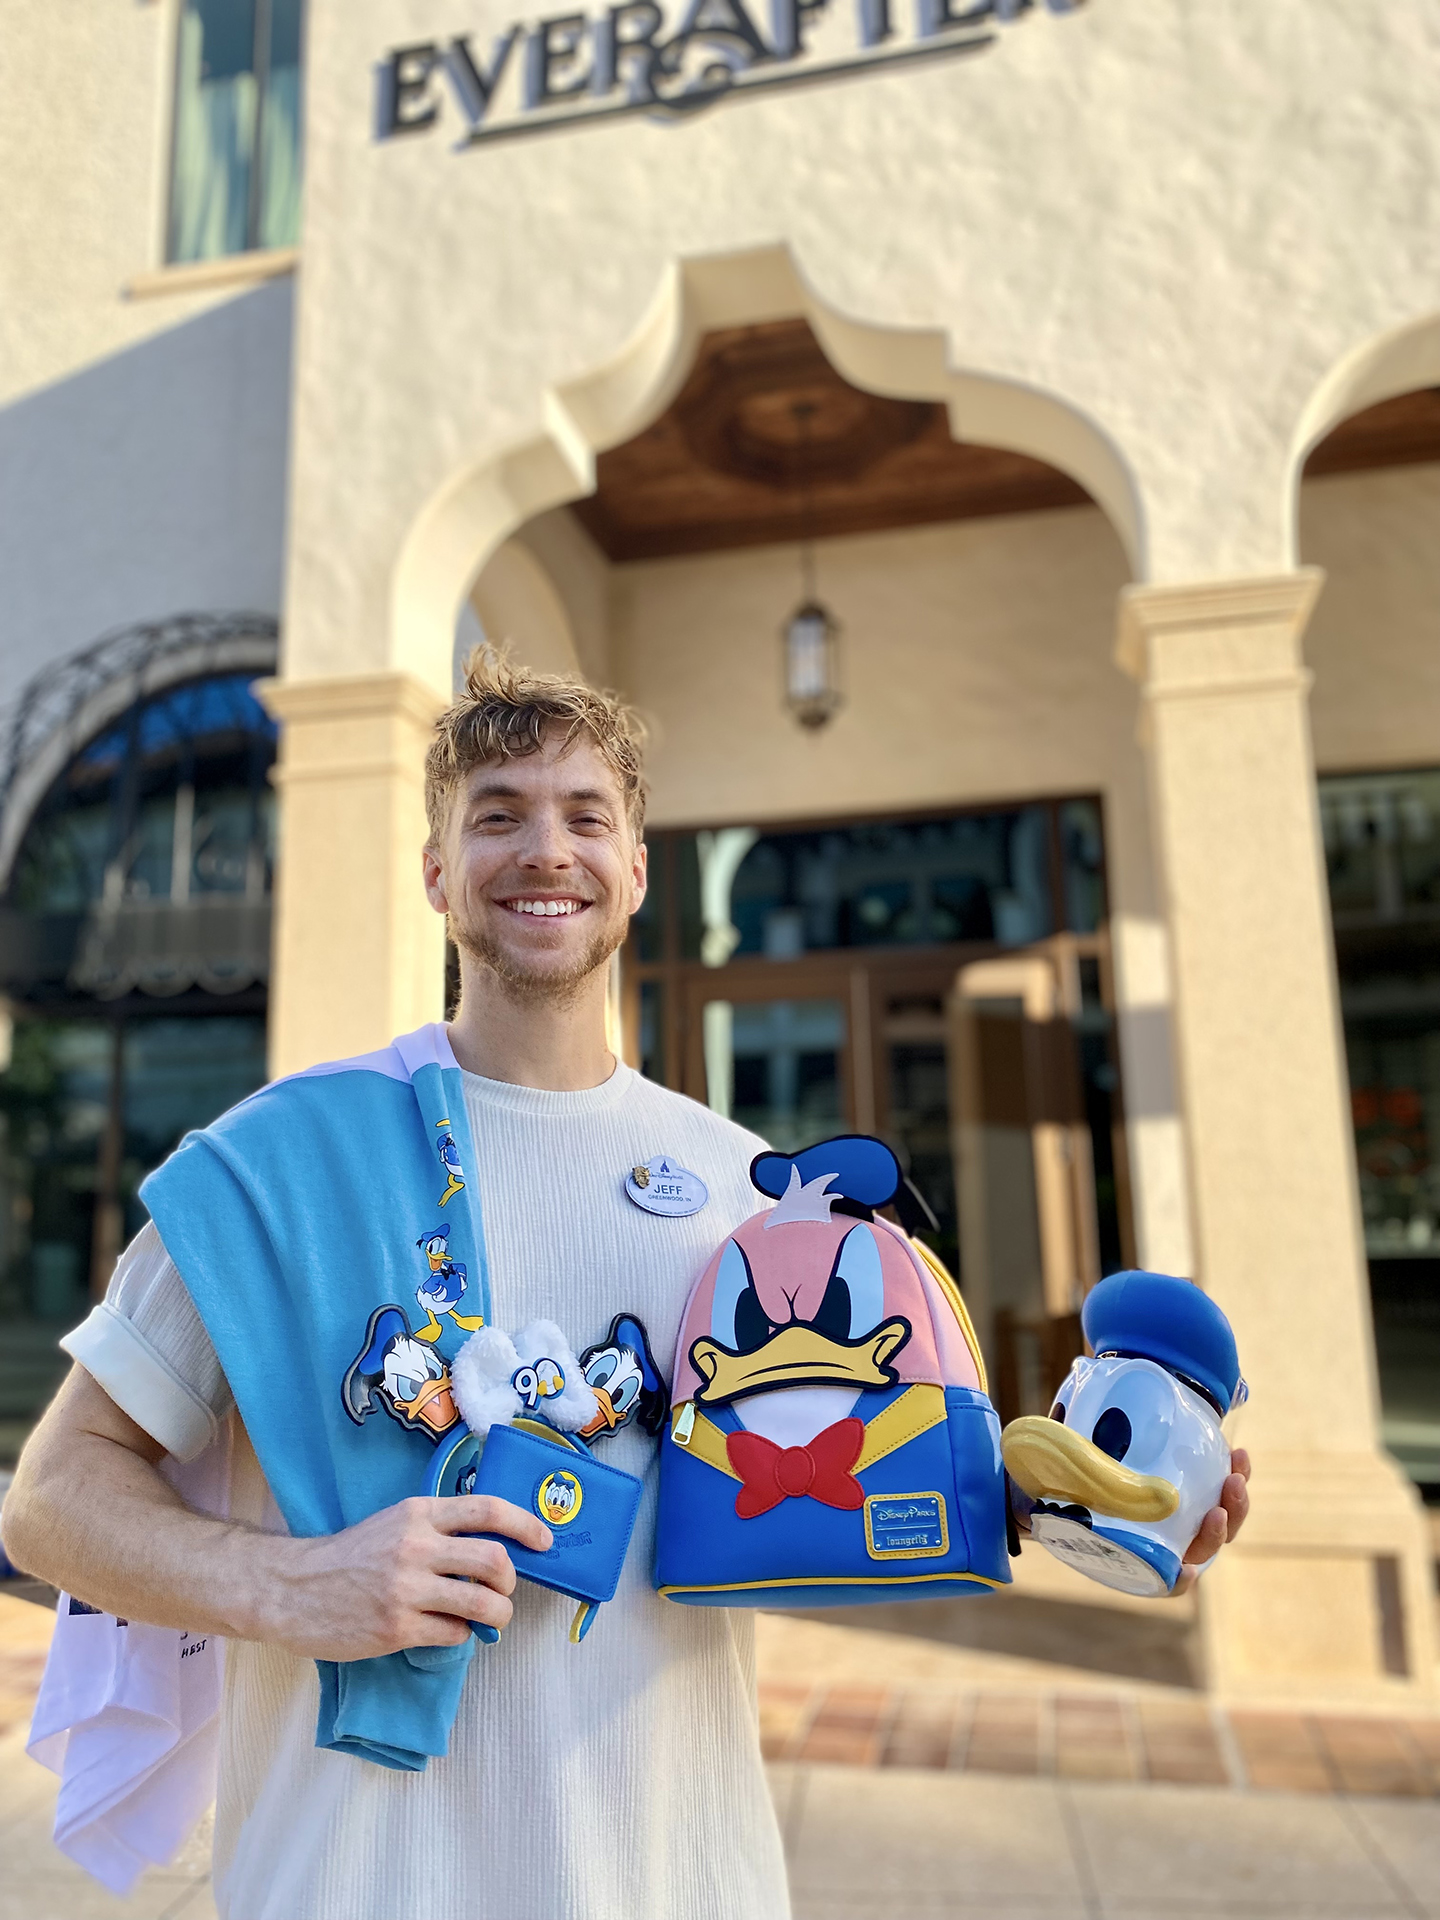 Jeffrey smiles in front of Disney Ever After holding Donald Duck 90 merchandise